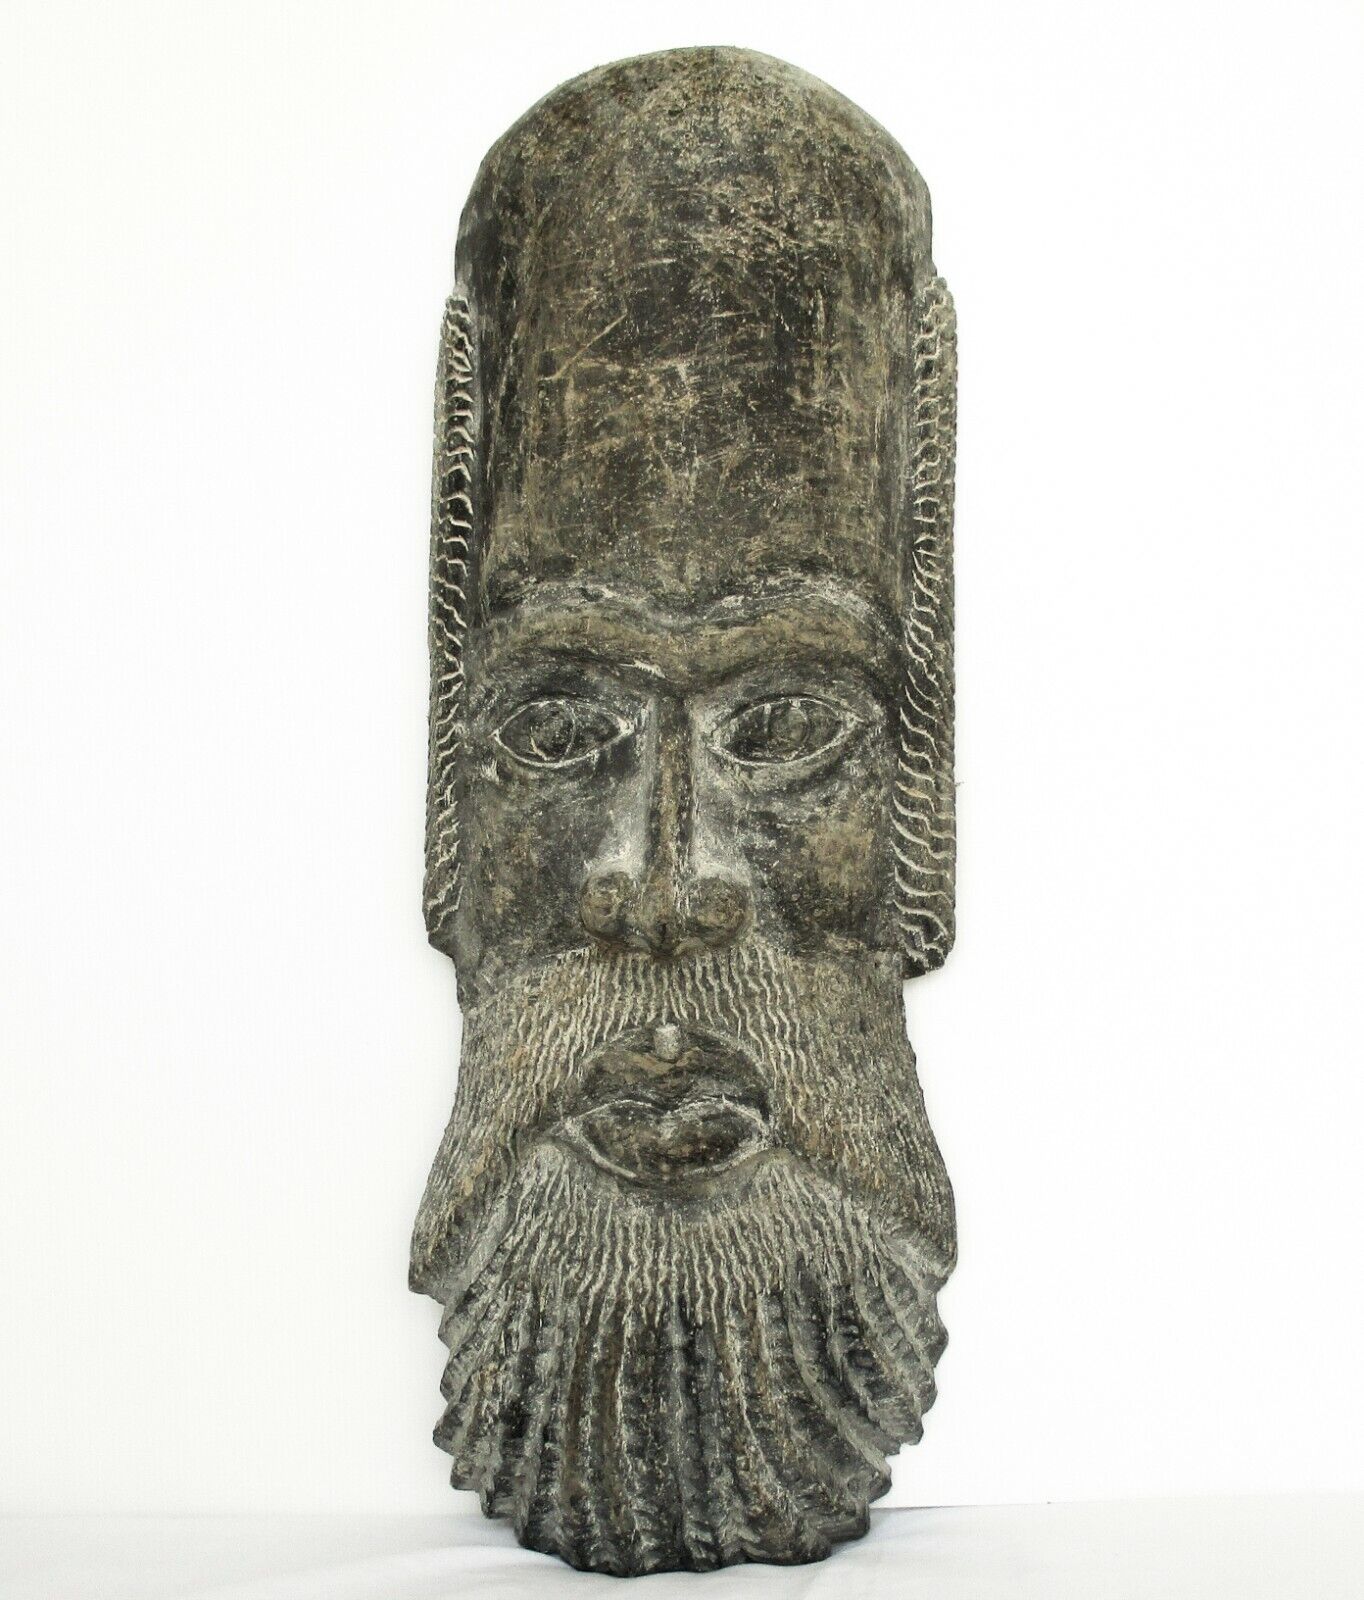  Large & Heavy Old Bearded Face Mask from Jamaica - Carved Wood   28 1/2